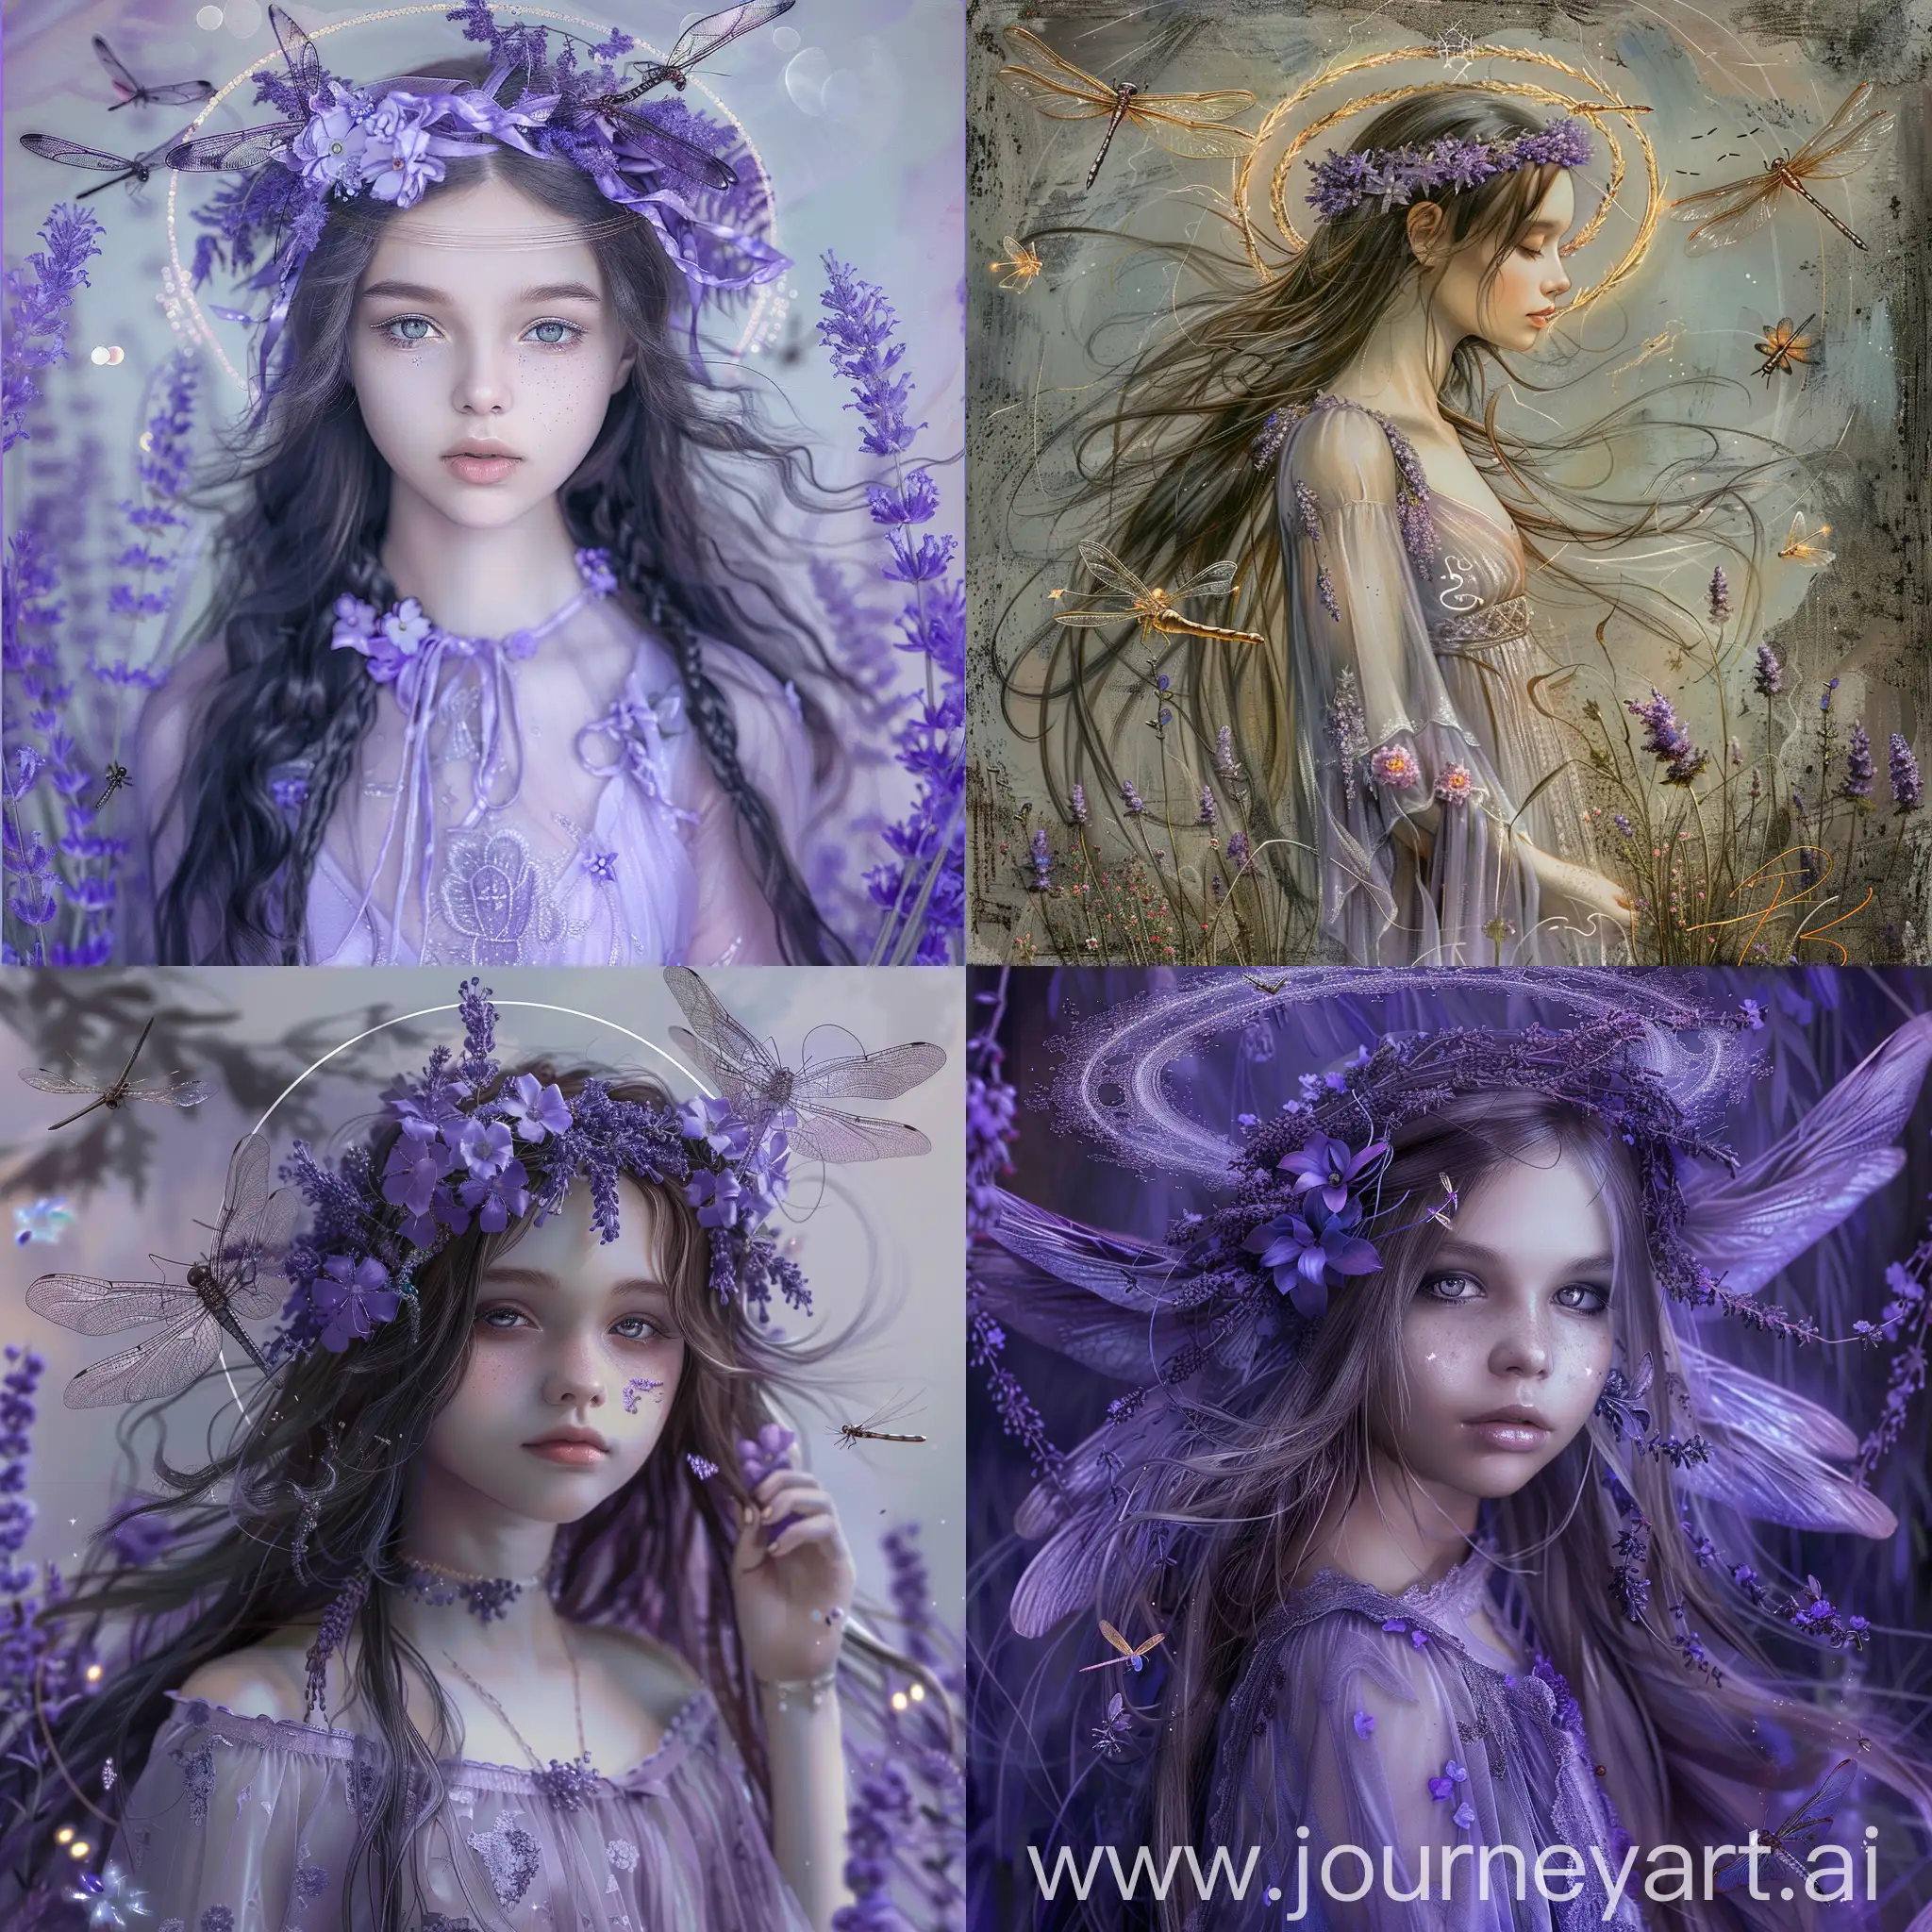 Ethereal-Saint-Girl-with-Halo-and-Lavender-Dress-Amidst-Dragonflies-and-Fireflies